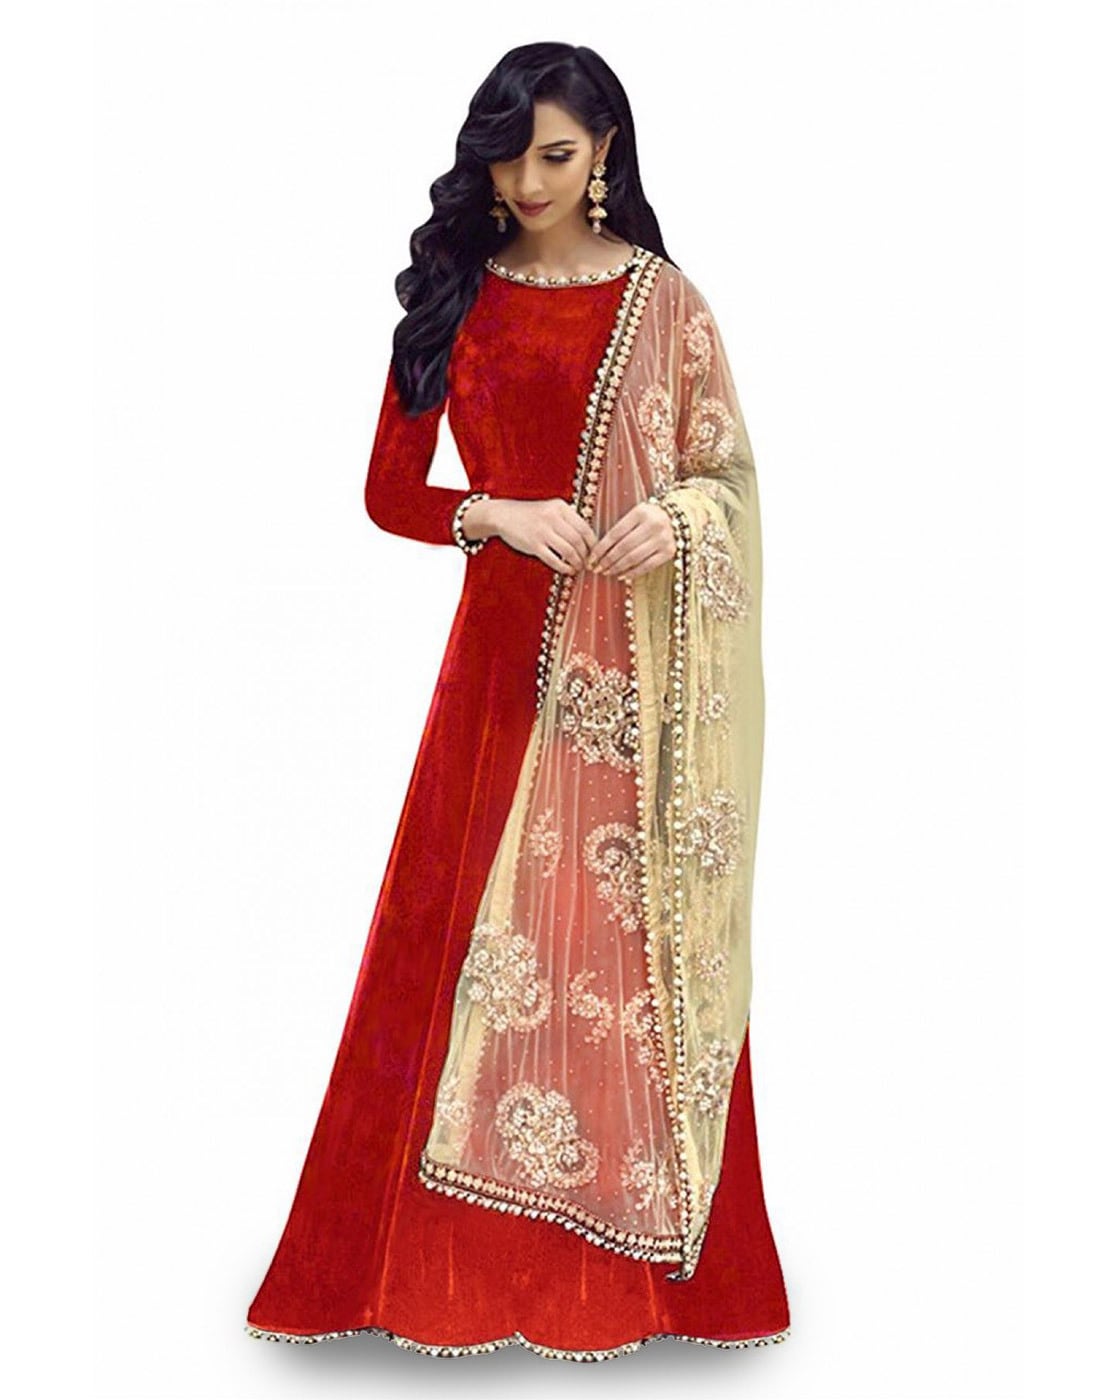 Indian Designer Aliya Cut Dresses With Dupatta And Pant Party Wear Red Gown  | eBay